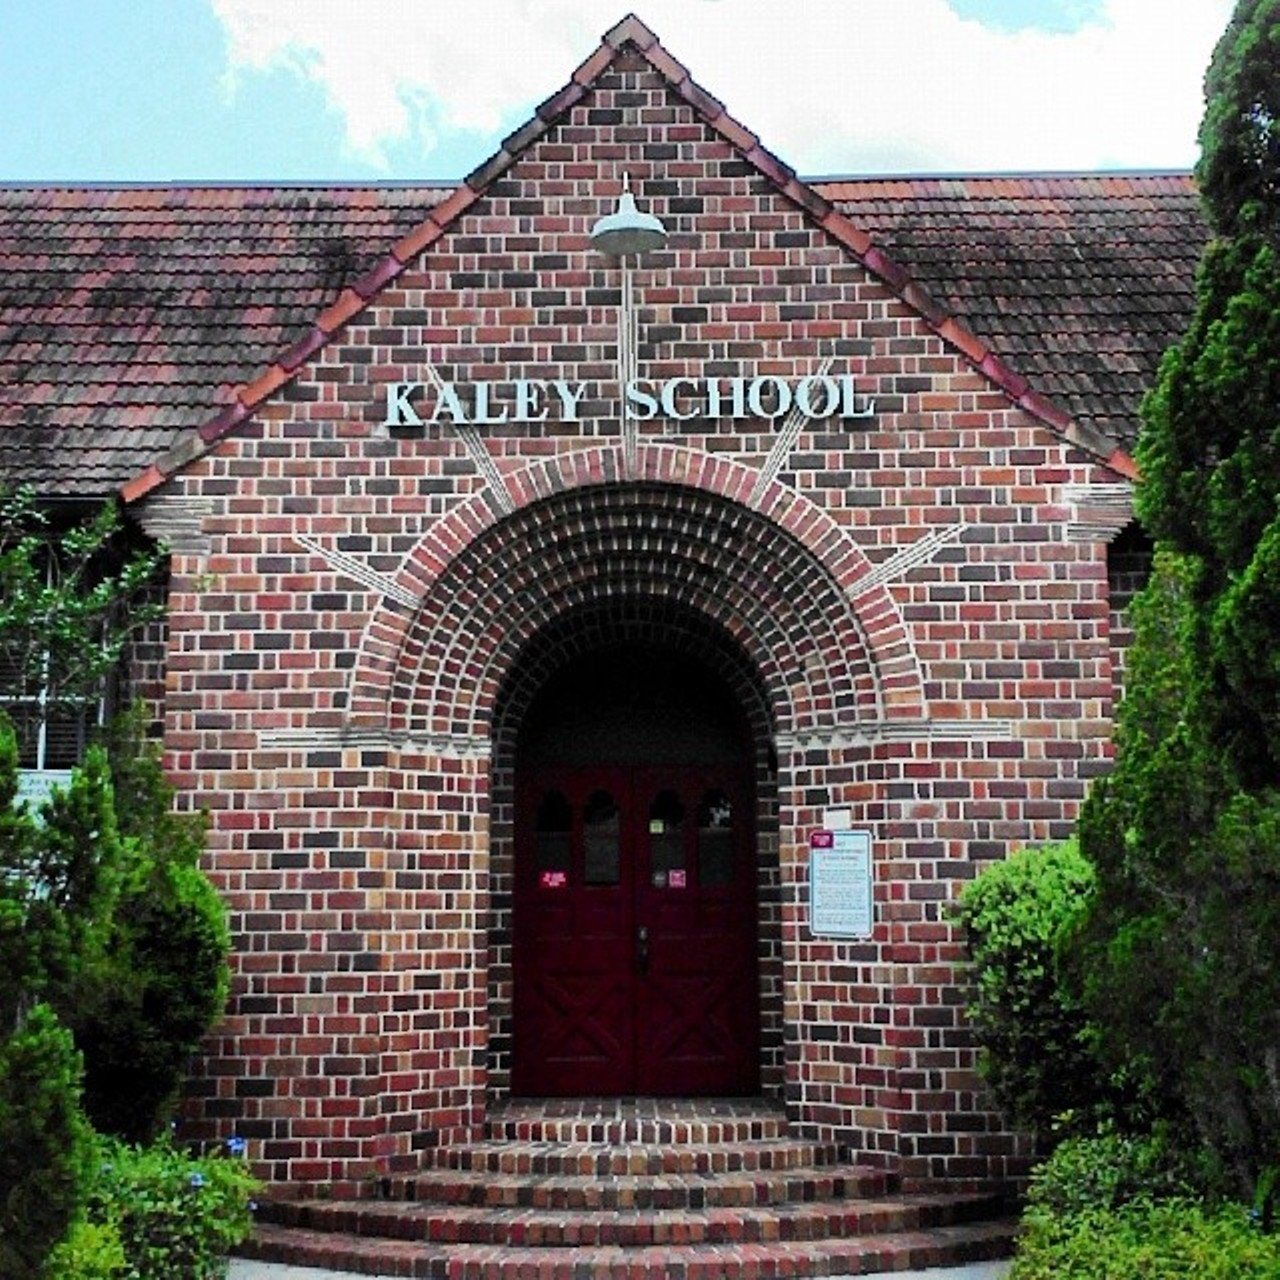 Kaley Street Elementary School
1600 E. Kaley St.
There was a lack of resources during the Great Depression which led to crews building the elementary school from eight pound bricks. Although updated, the school is the only example of this style building that&#146;s non-residential in the city. It was originally built with only six classrooms but since expansion, now has a group of one story buildings in a rectangular shape with two courtyards.
Photo via lord_of_baltimore/Instagram